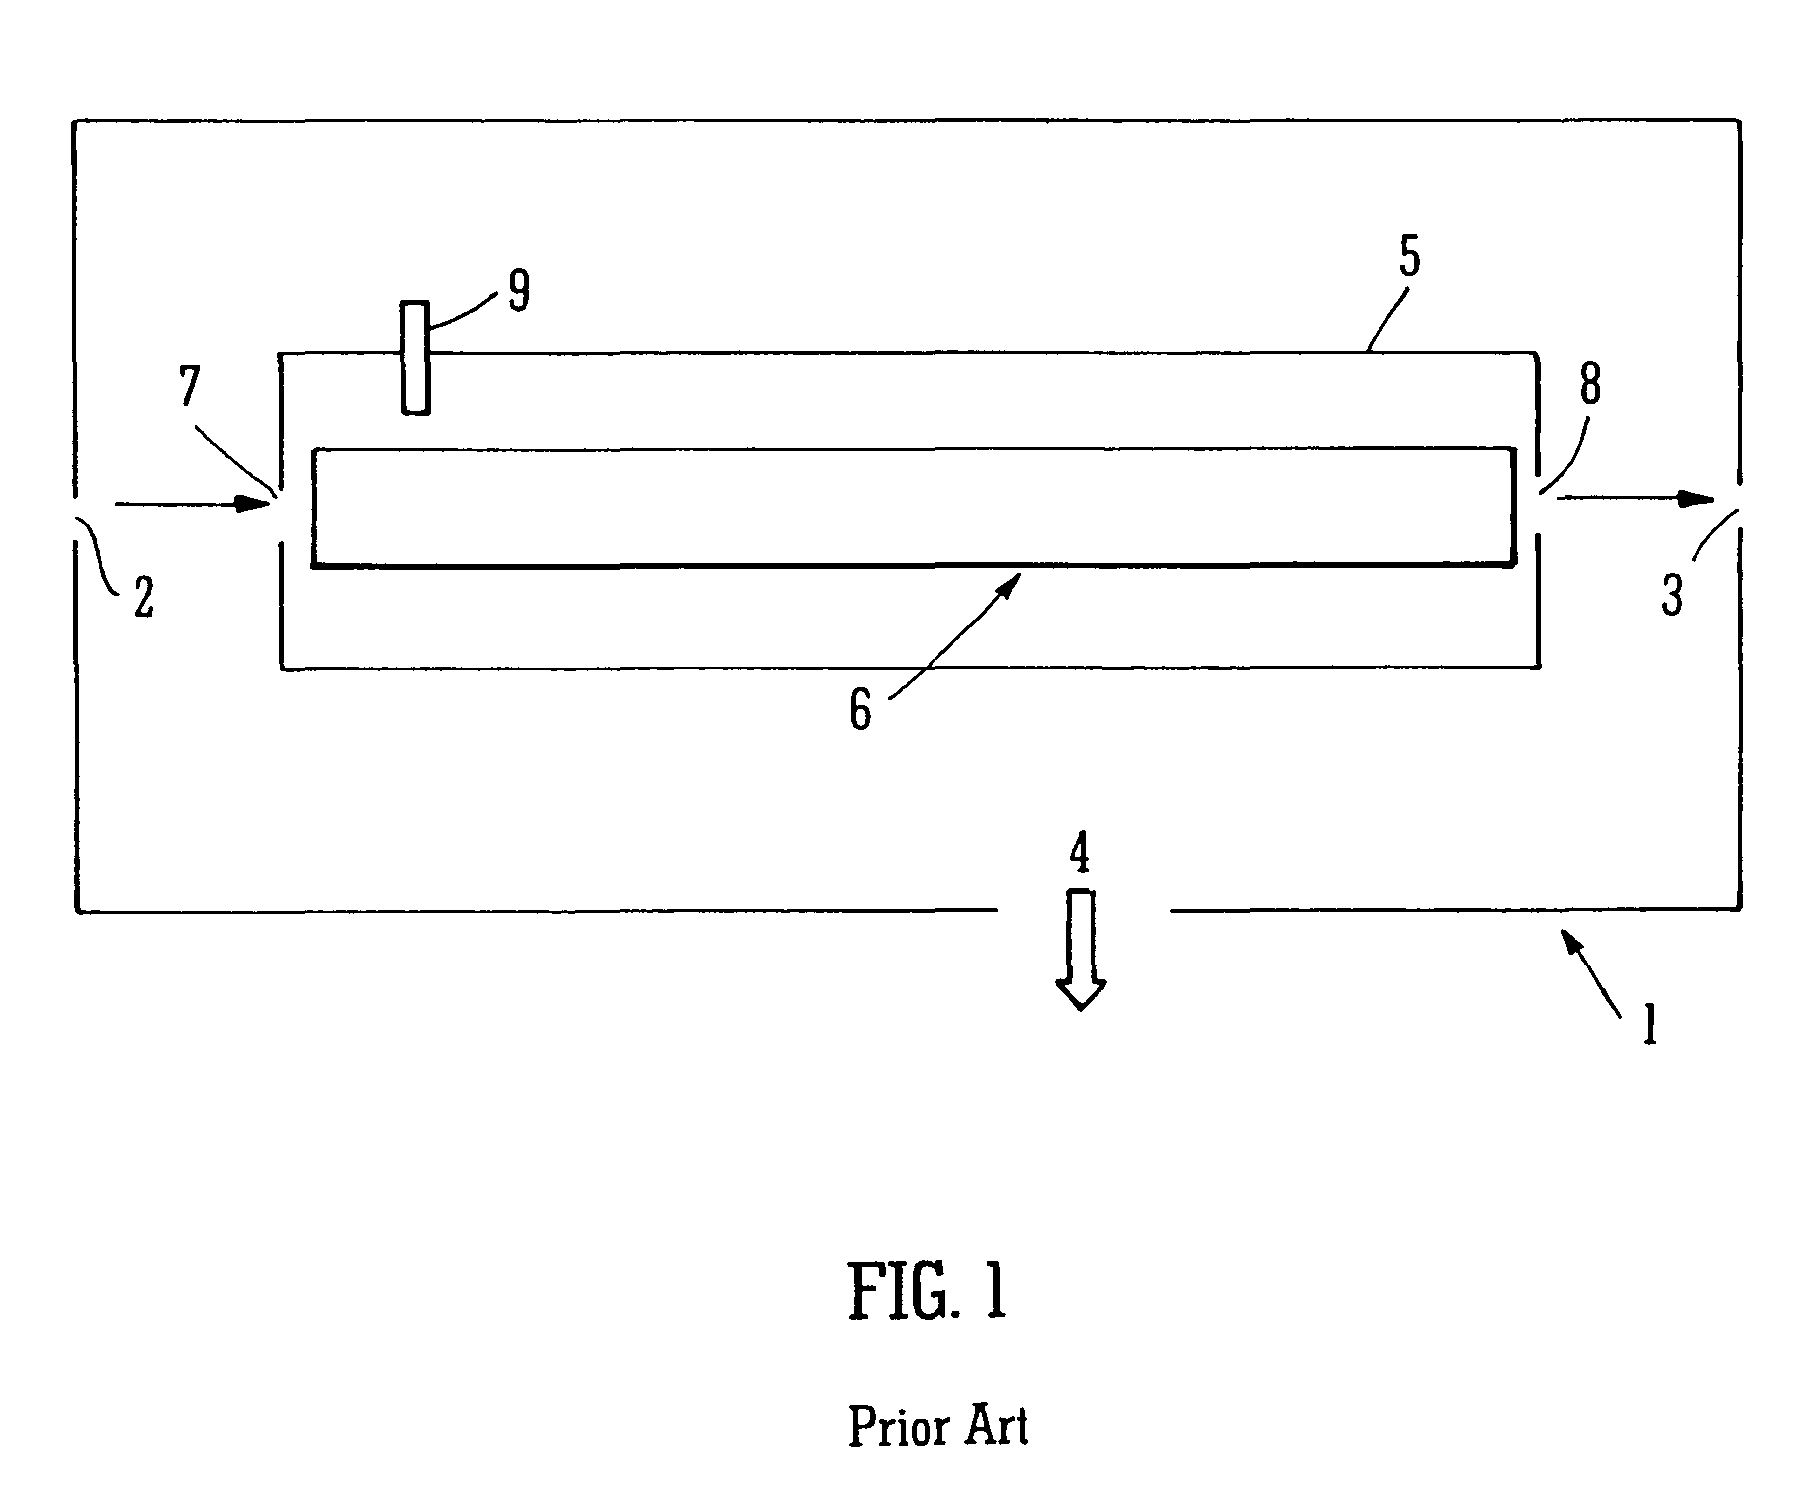 Apparatus comprising an ion mobility spectrometer